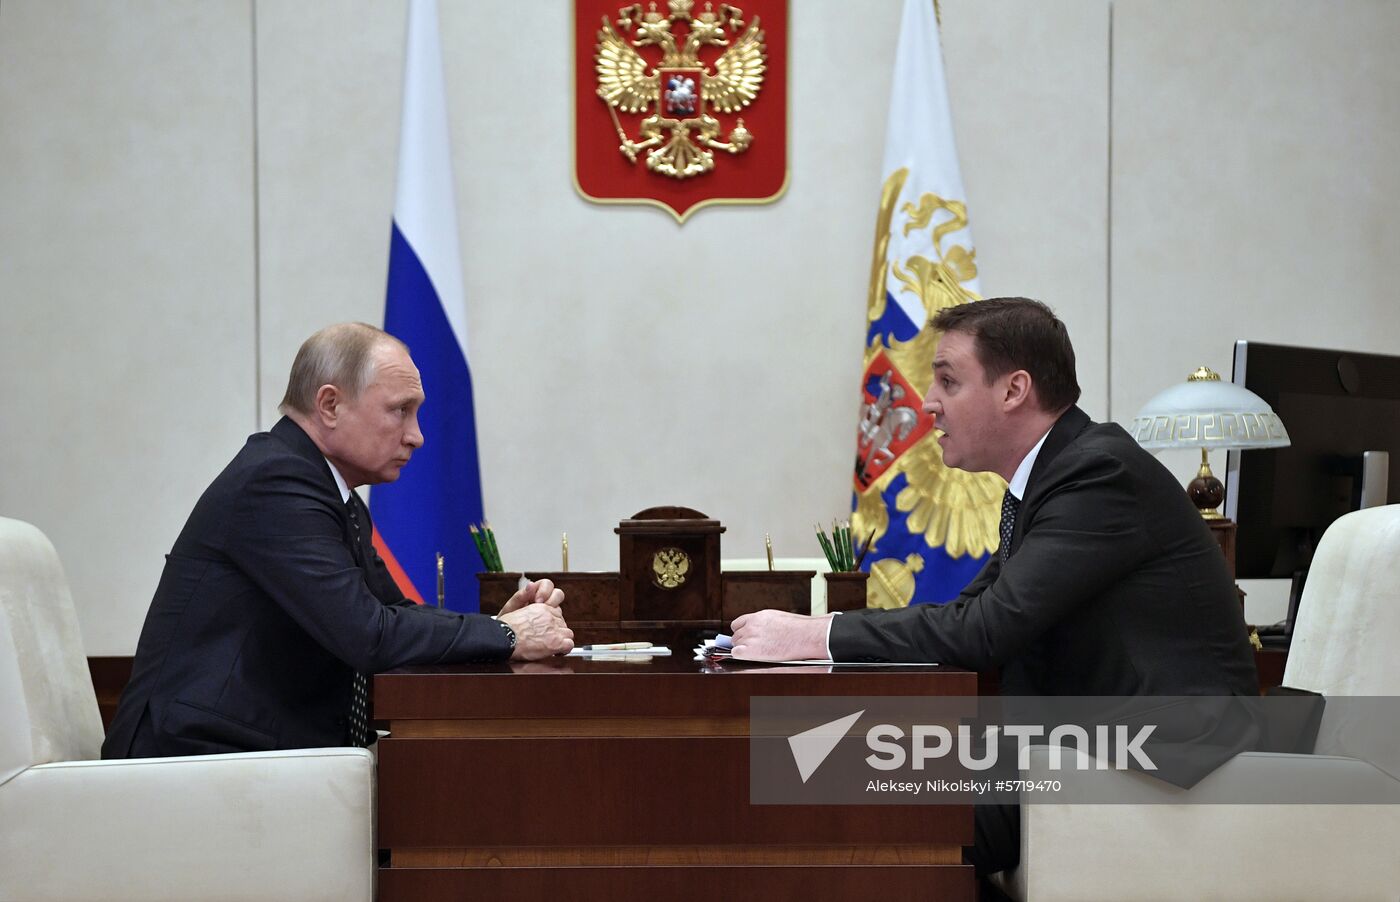 President Putin meets with Agriculture Minister Patrushev